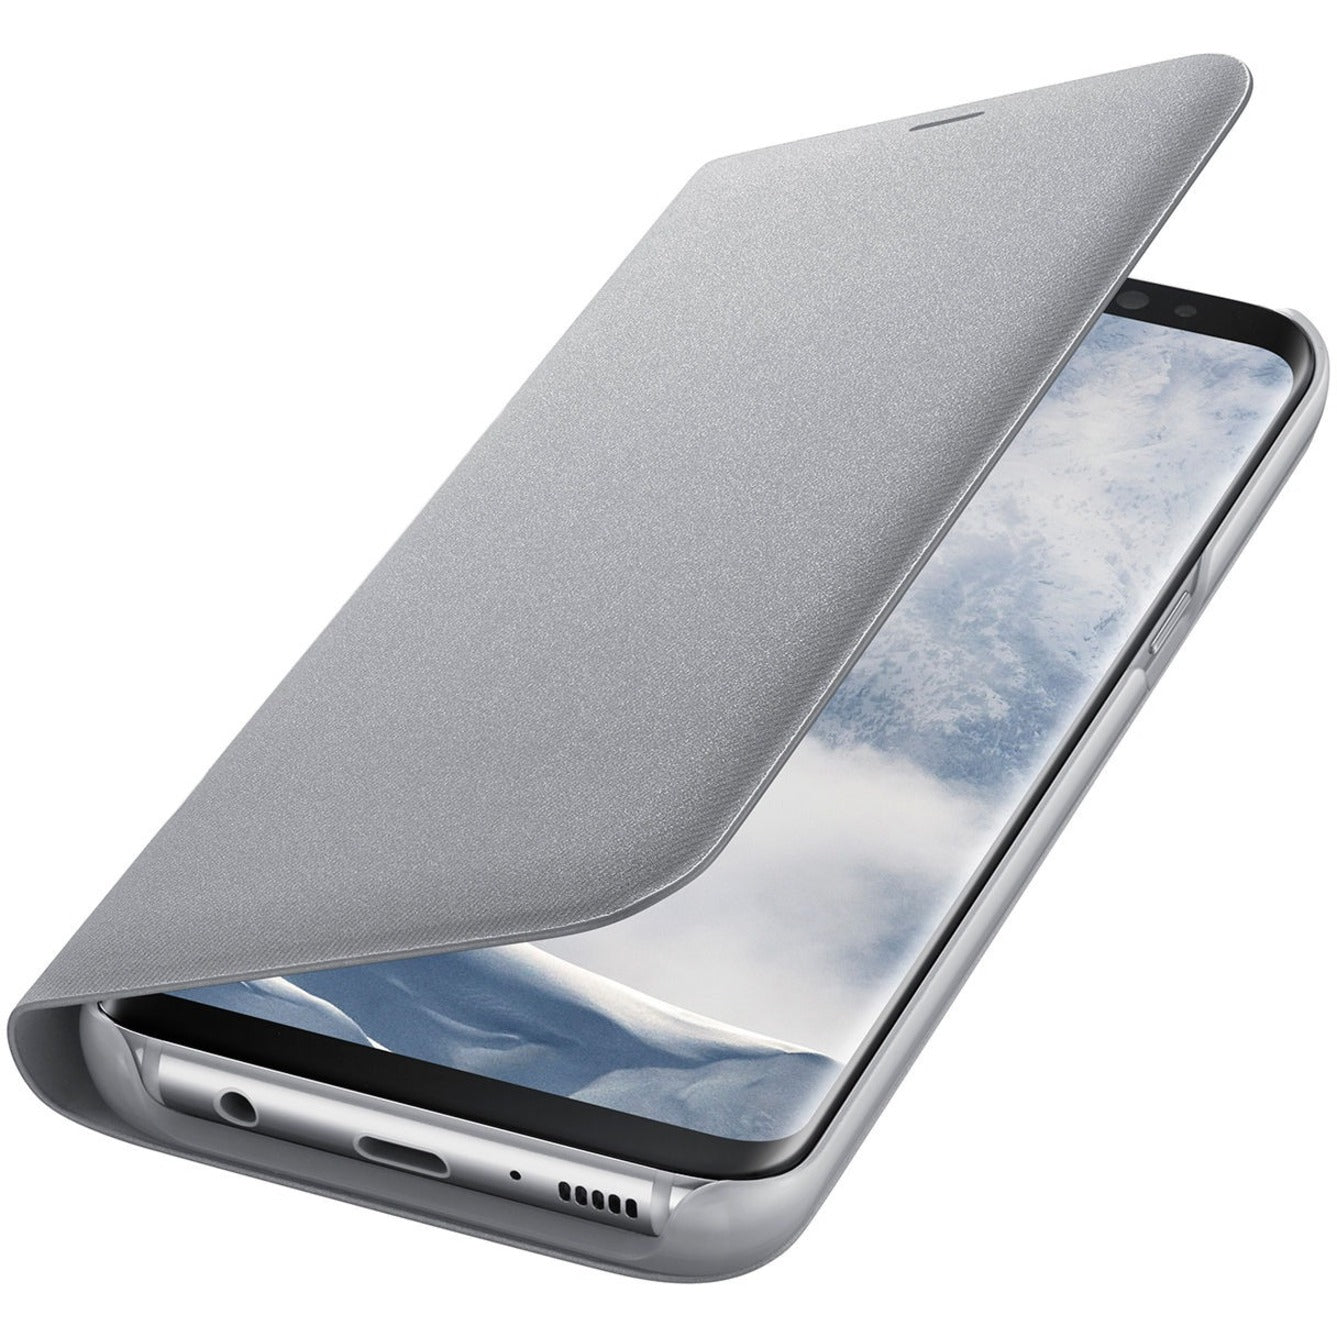 Samsung Carrying Case (Wallet) Smartphone Credit Card Money - Silver